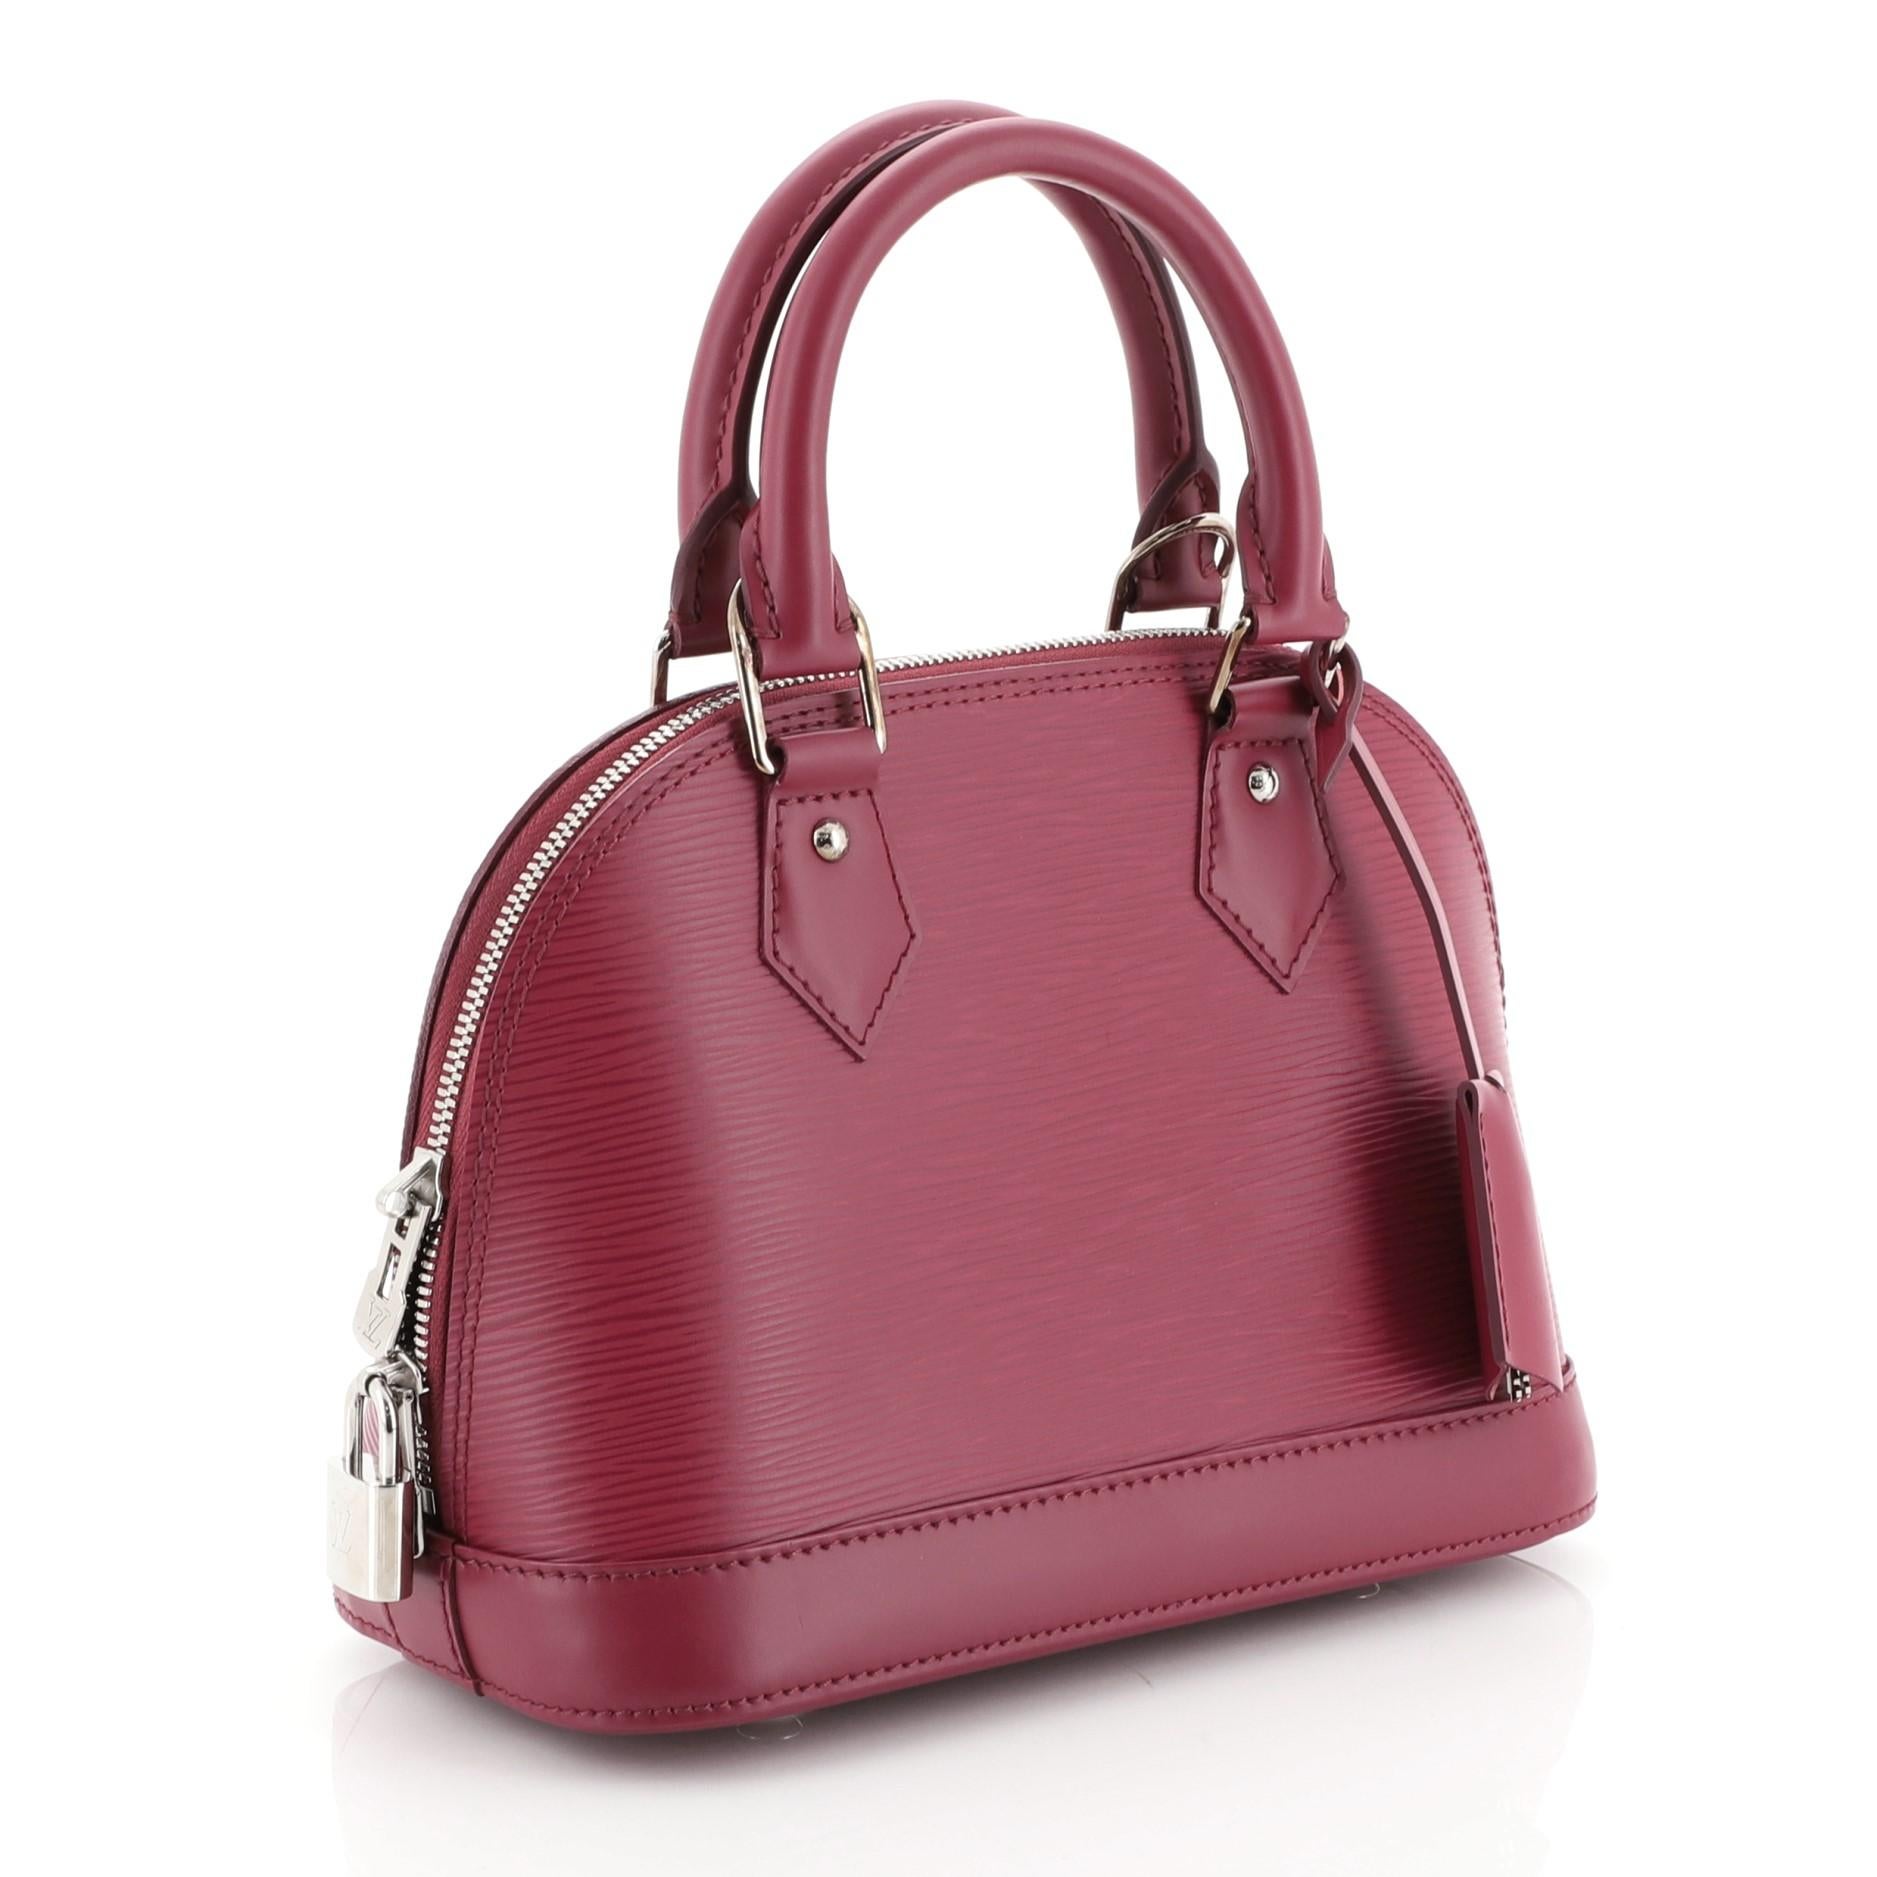 This Louis Vuitton Alma Handbag Epi Leather BB, crafted in purple epi leather, features dual rolled leather handles and silver-tone hardware. Its all-around zip closure opens to a purple microfiber interior with slip pocket. Authenticity code reads: